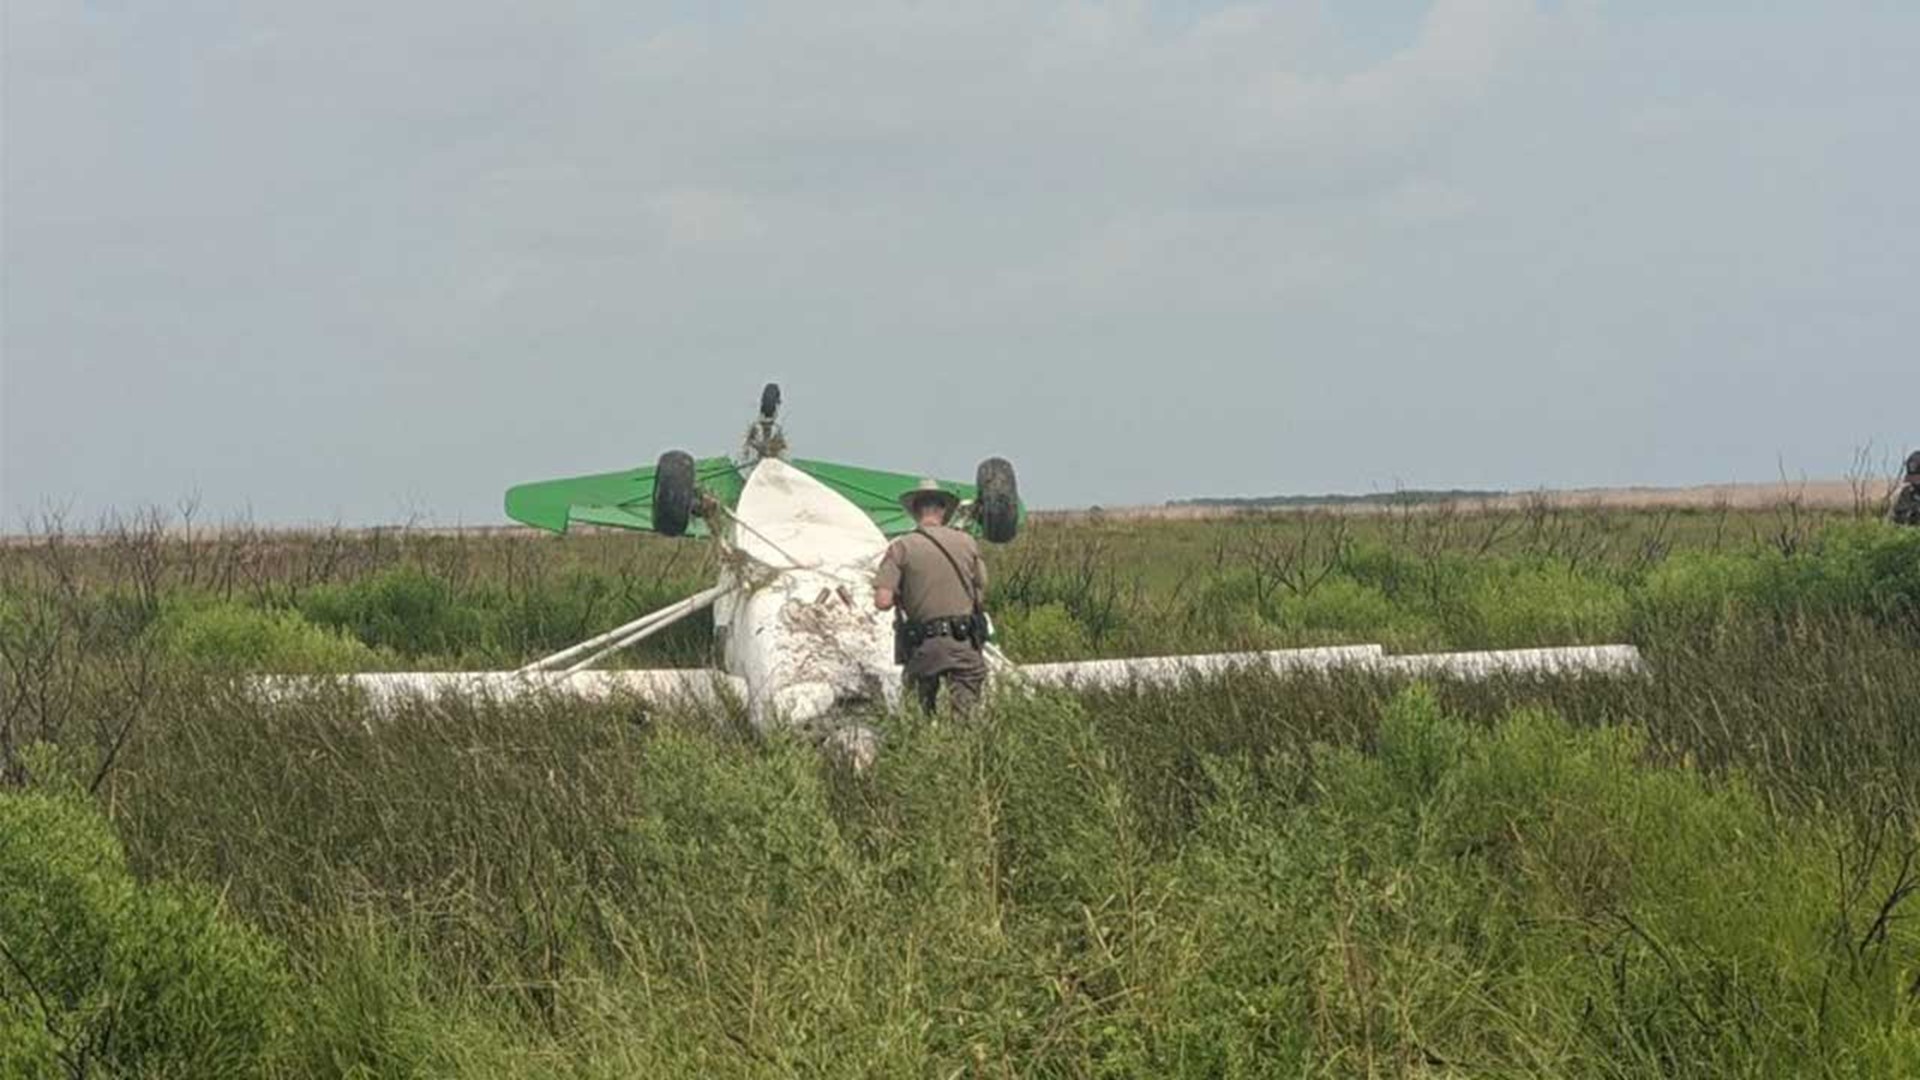 The pilot told DPS officials that he misjudged the height of the grass when he was landing.